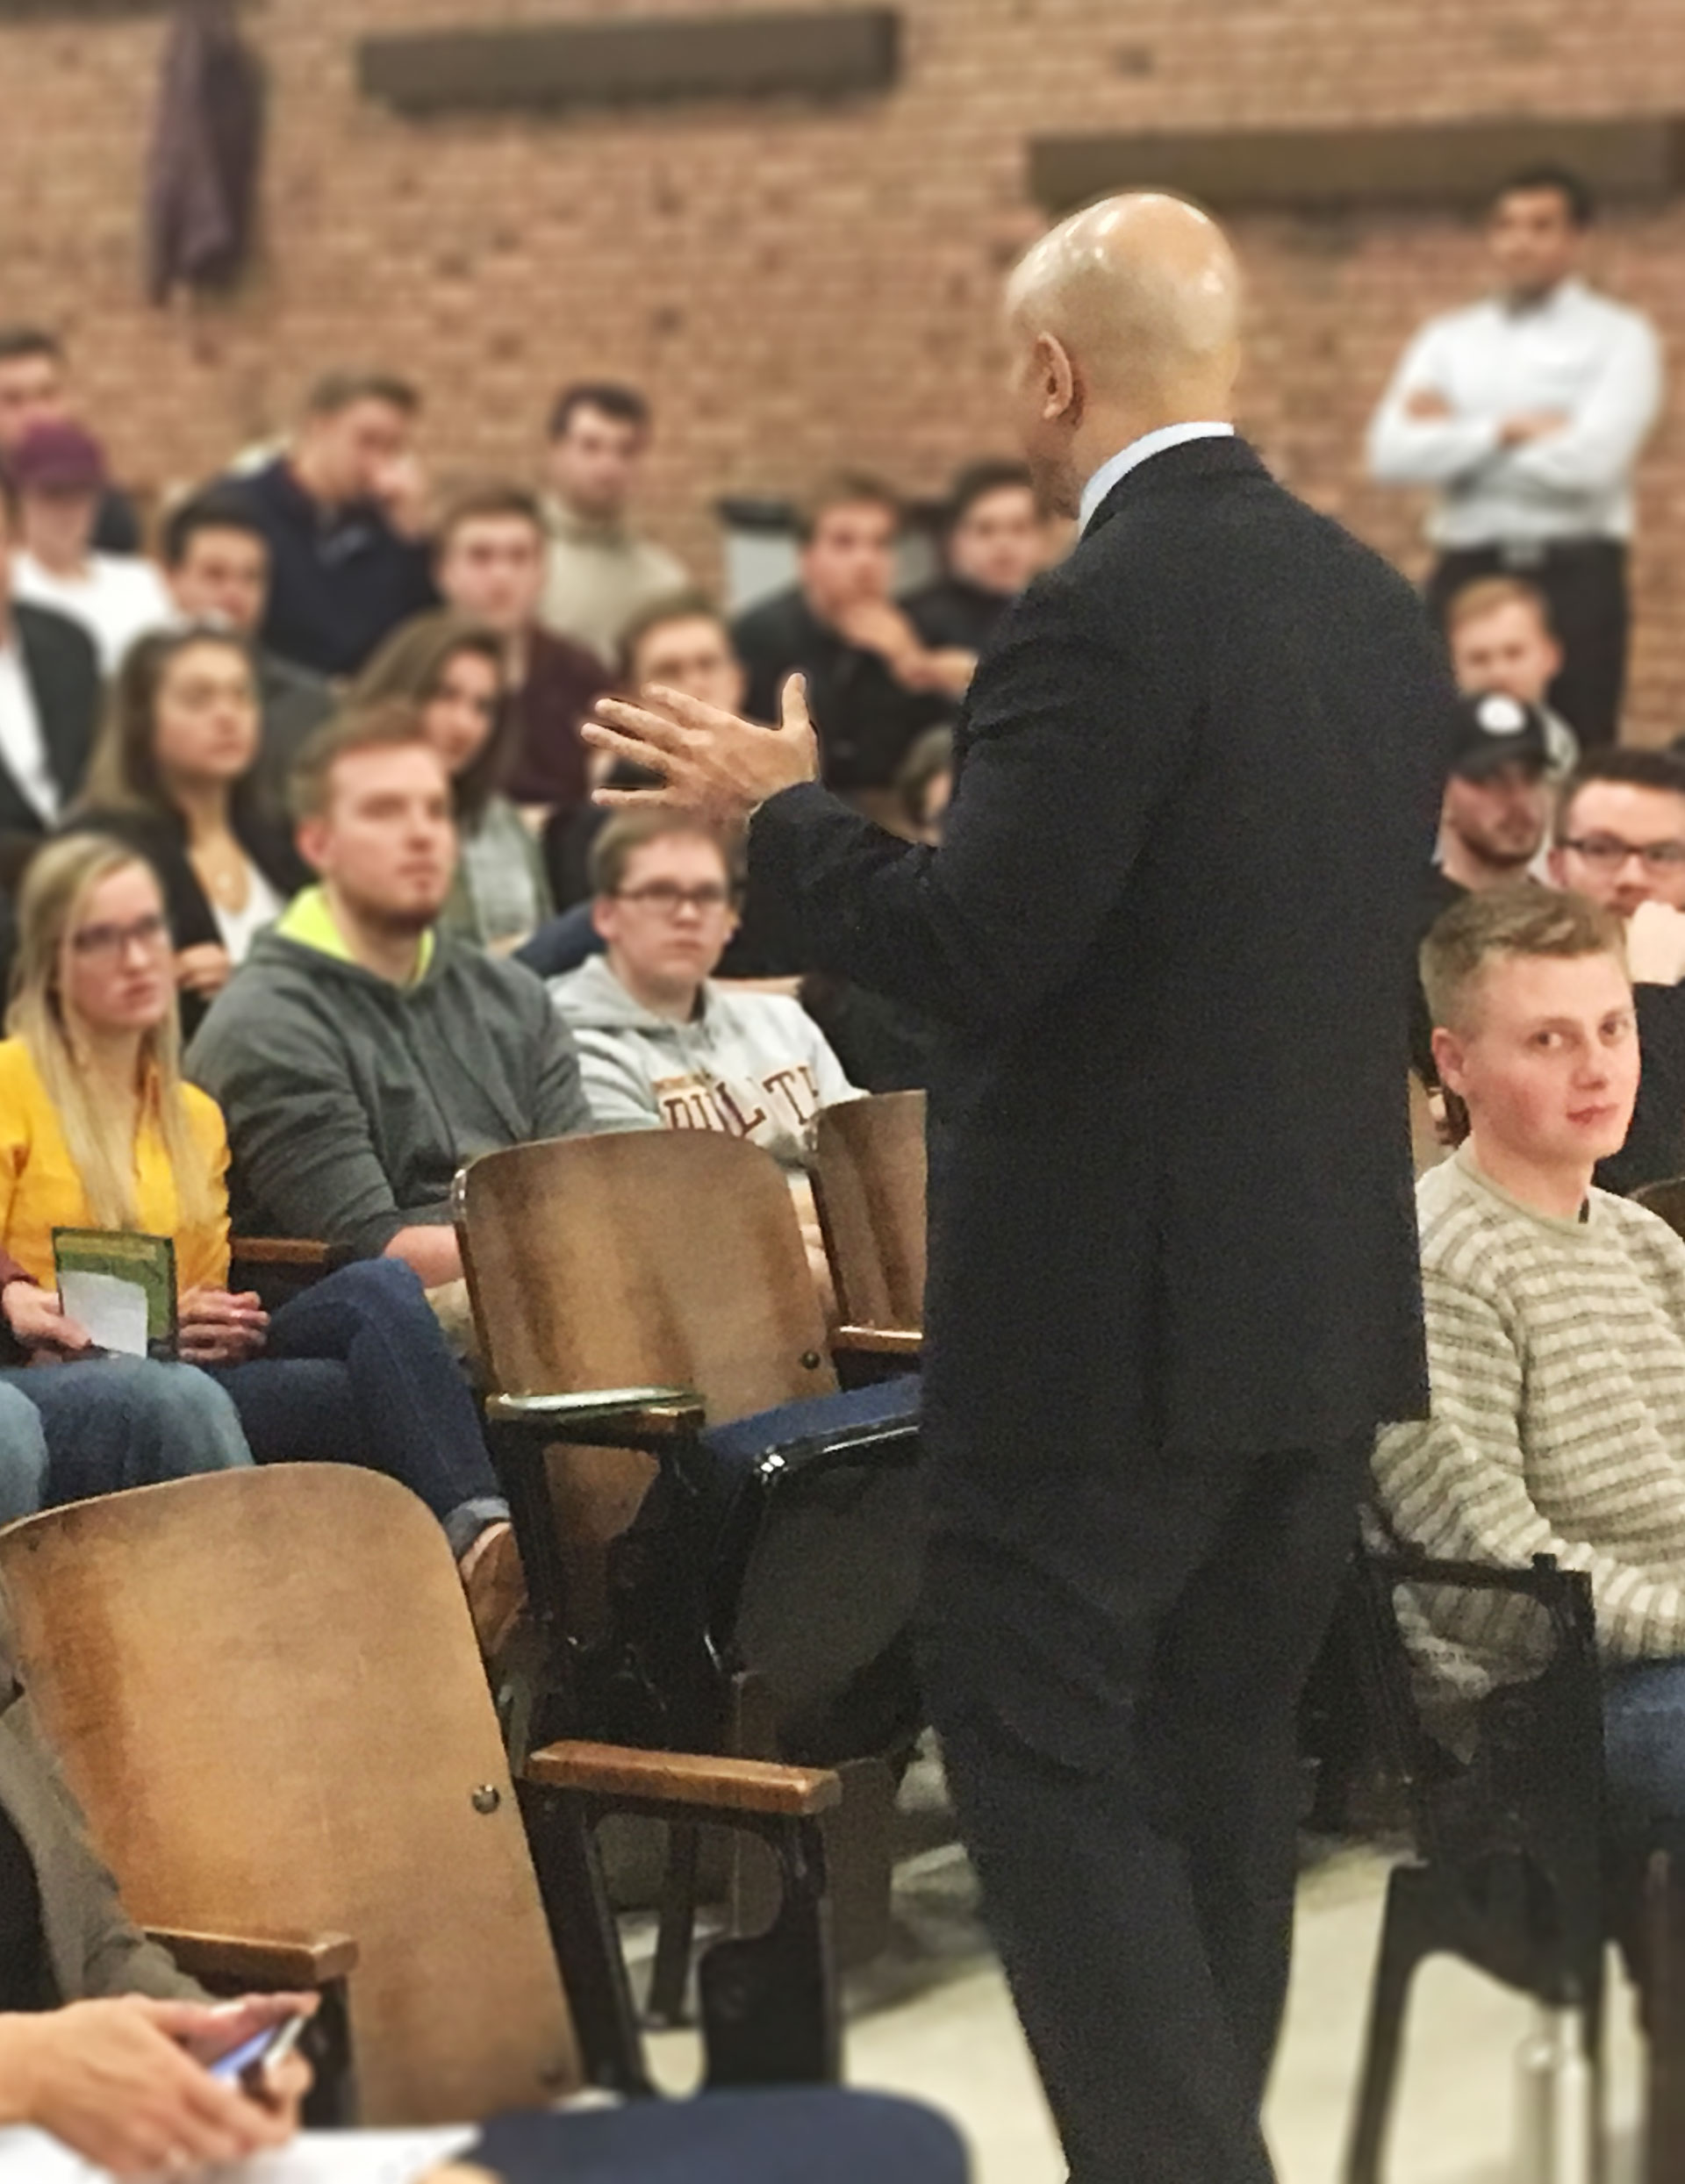 Neel Kashkari speaking to a lecture hall of students